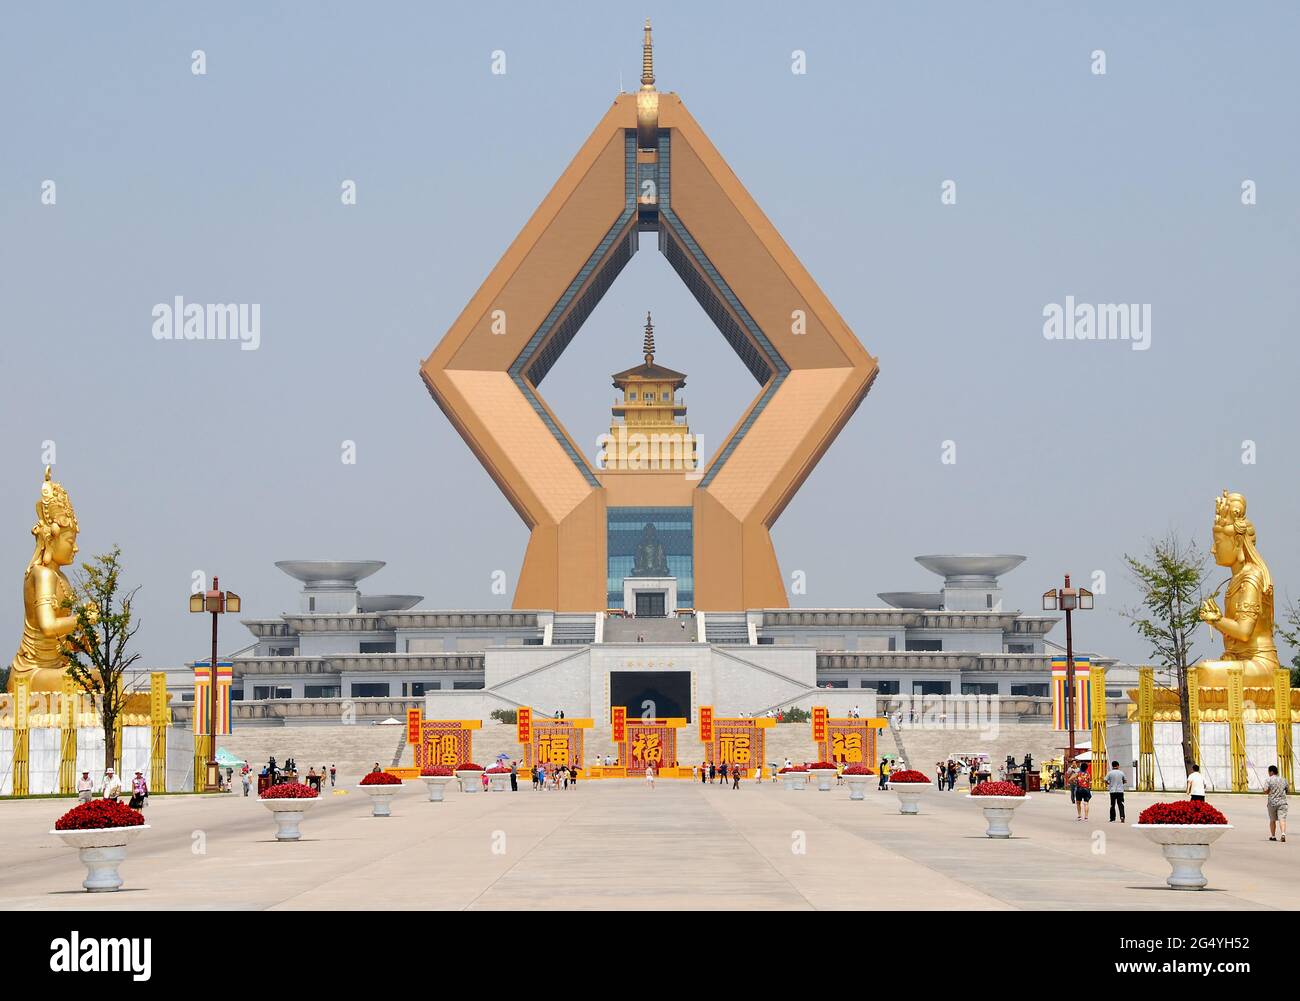 Famen Temple, Shaanxi Province, China: The huge diamond-shaped Namaste Dagoba, part of the new complex at the Famen Temple. With gold statues. Stock Photo